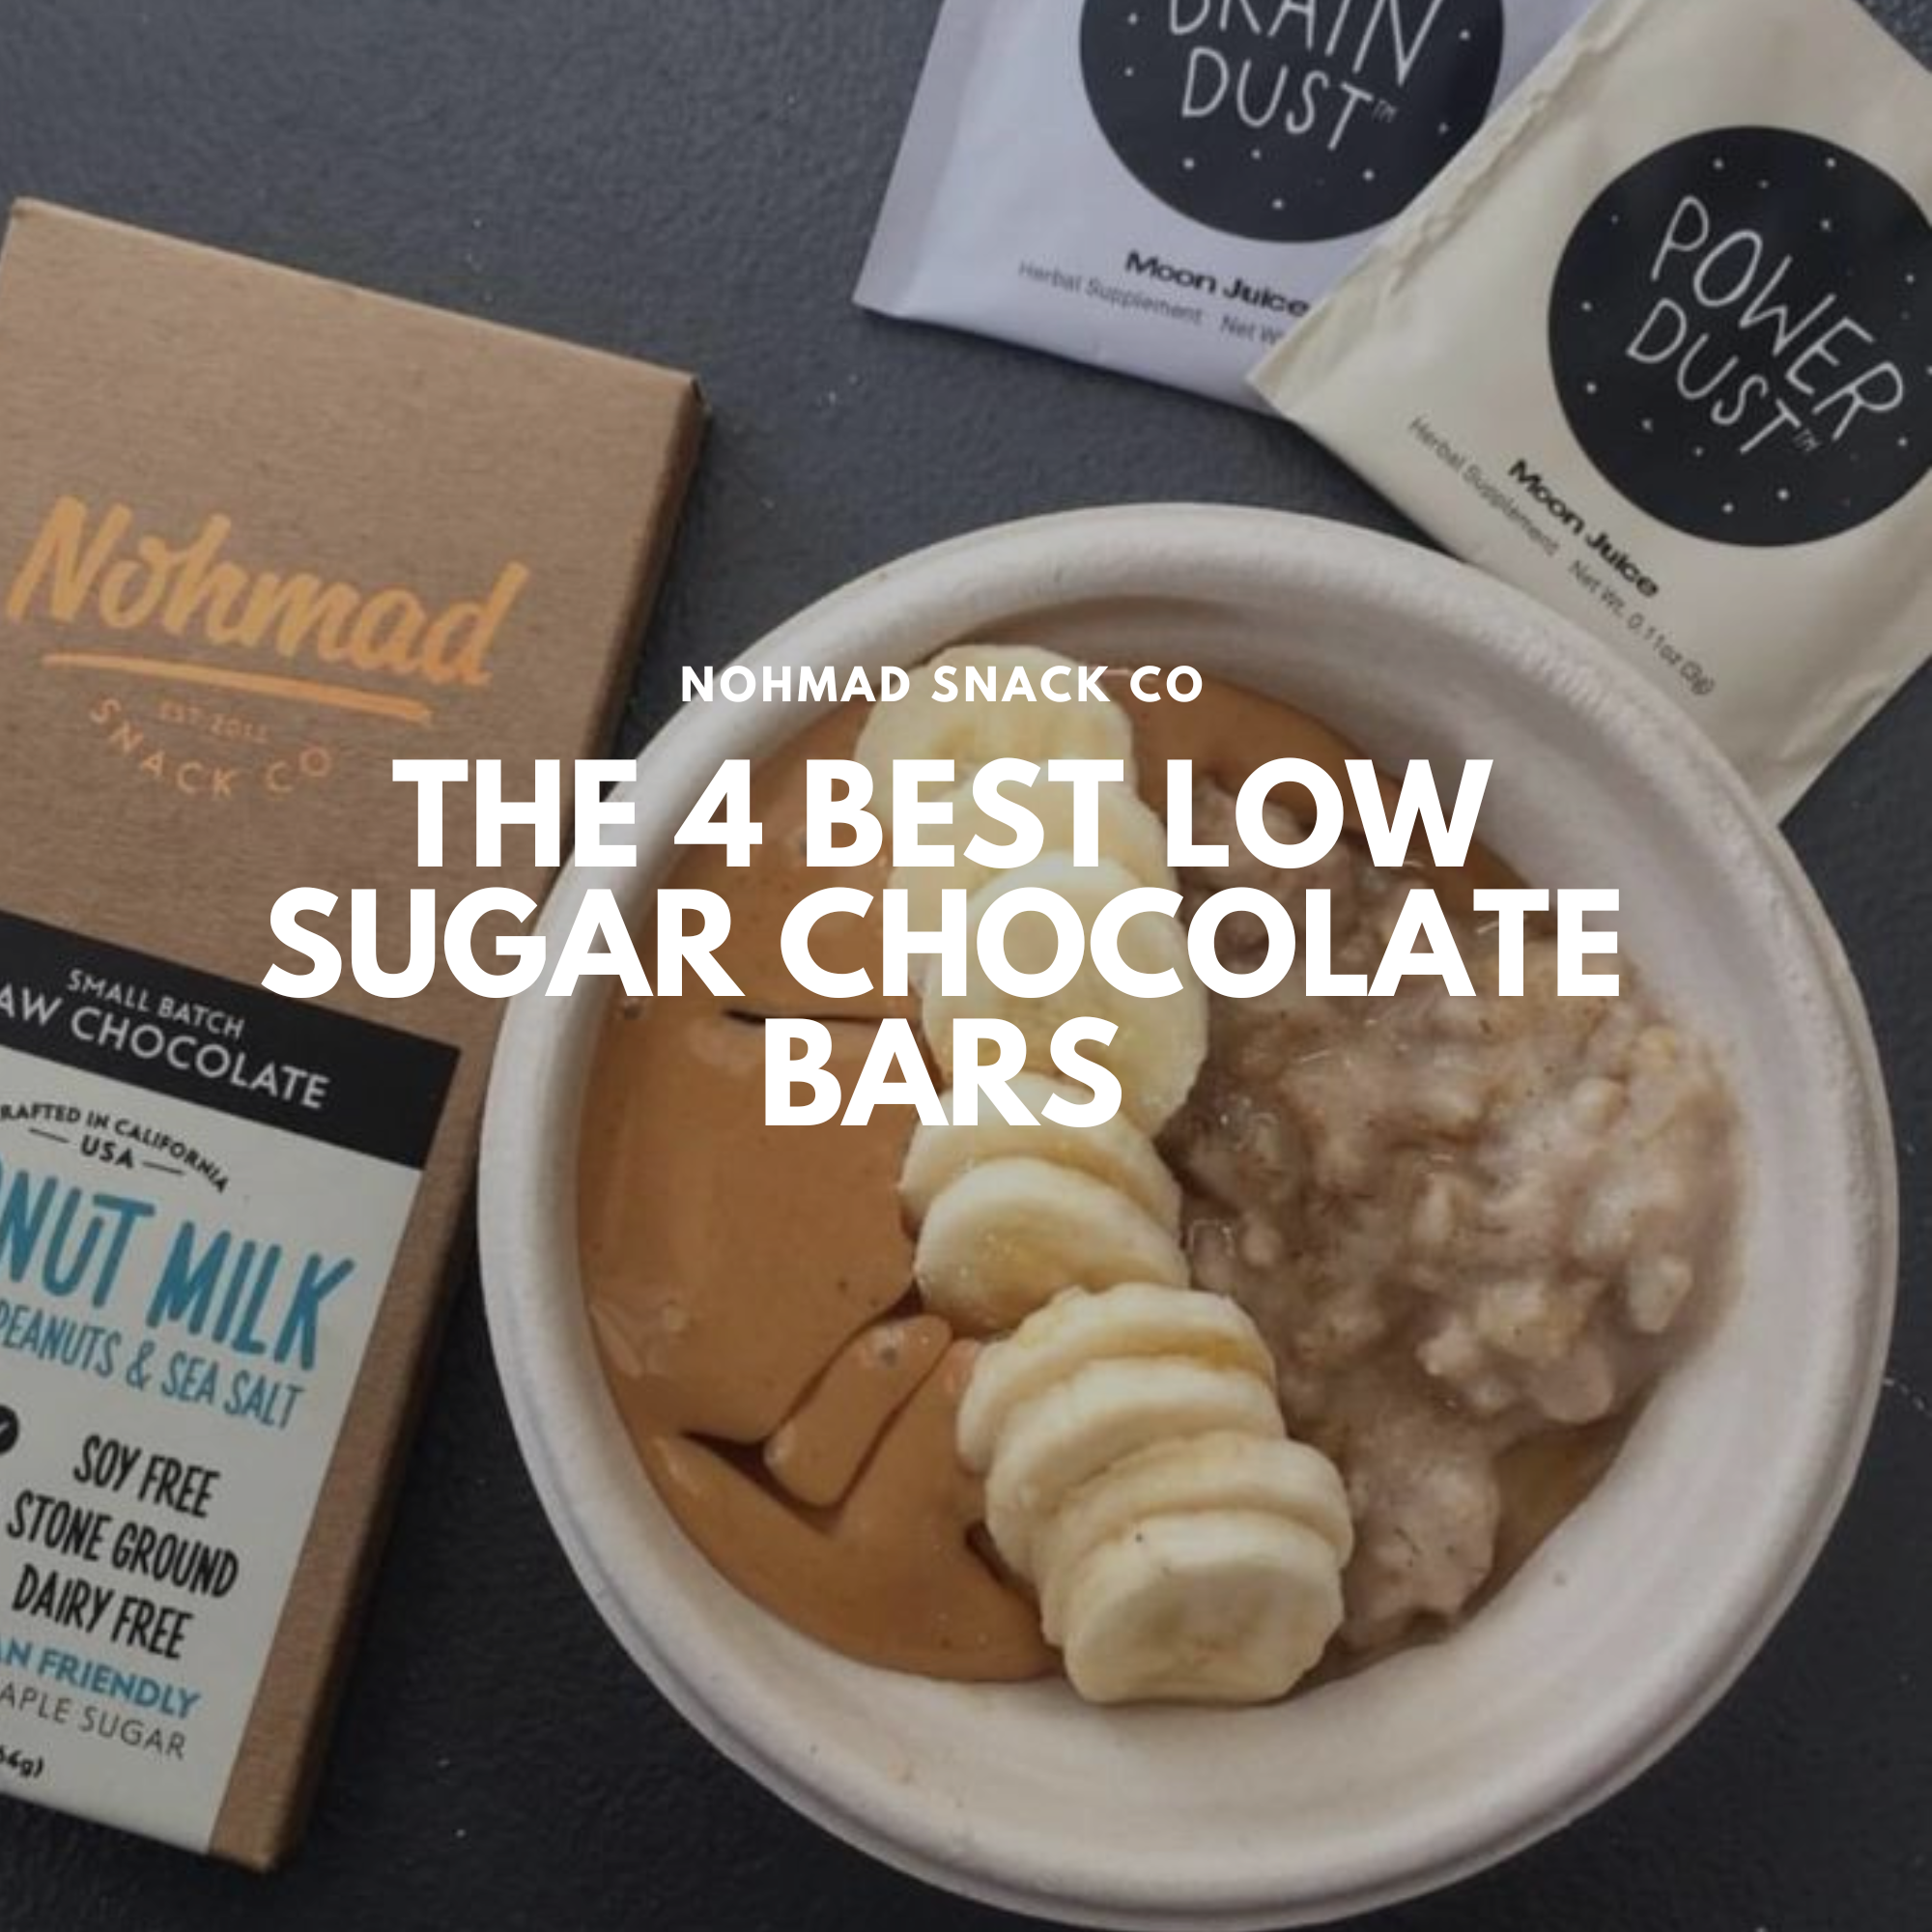 The 4 Best Low Sugar Chocolate Bars